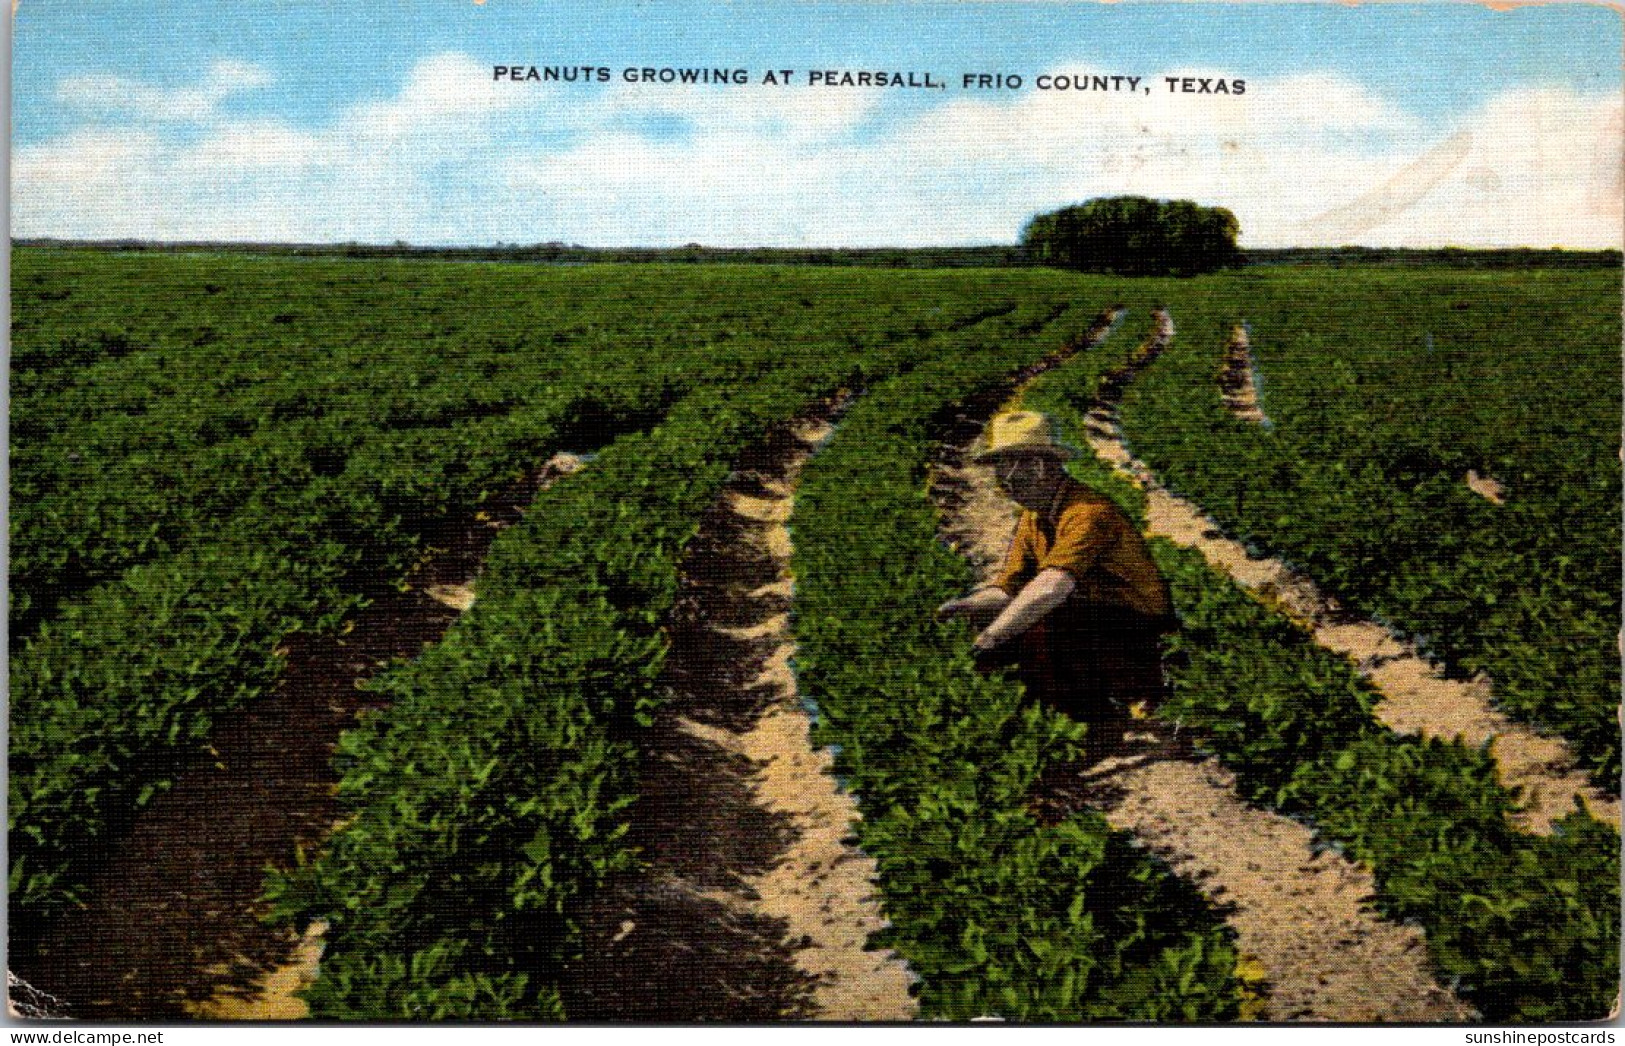 Texas Frio County Peanuts Growing At Pearsall - Abilene